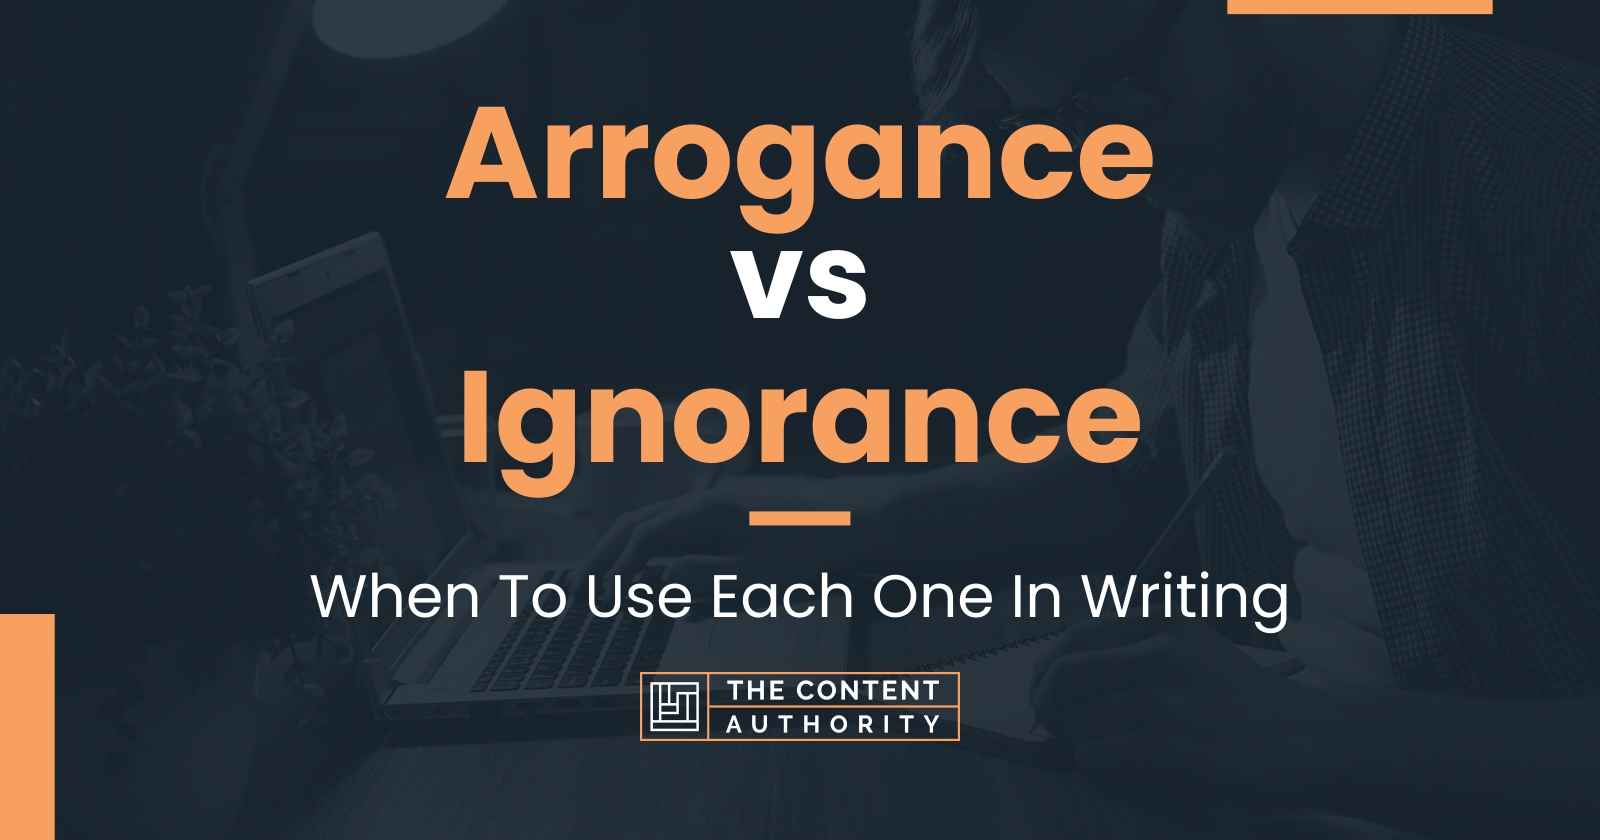 Arrogance vs Ignorance: When To Use Each One In Writing